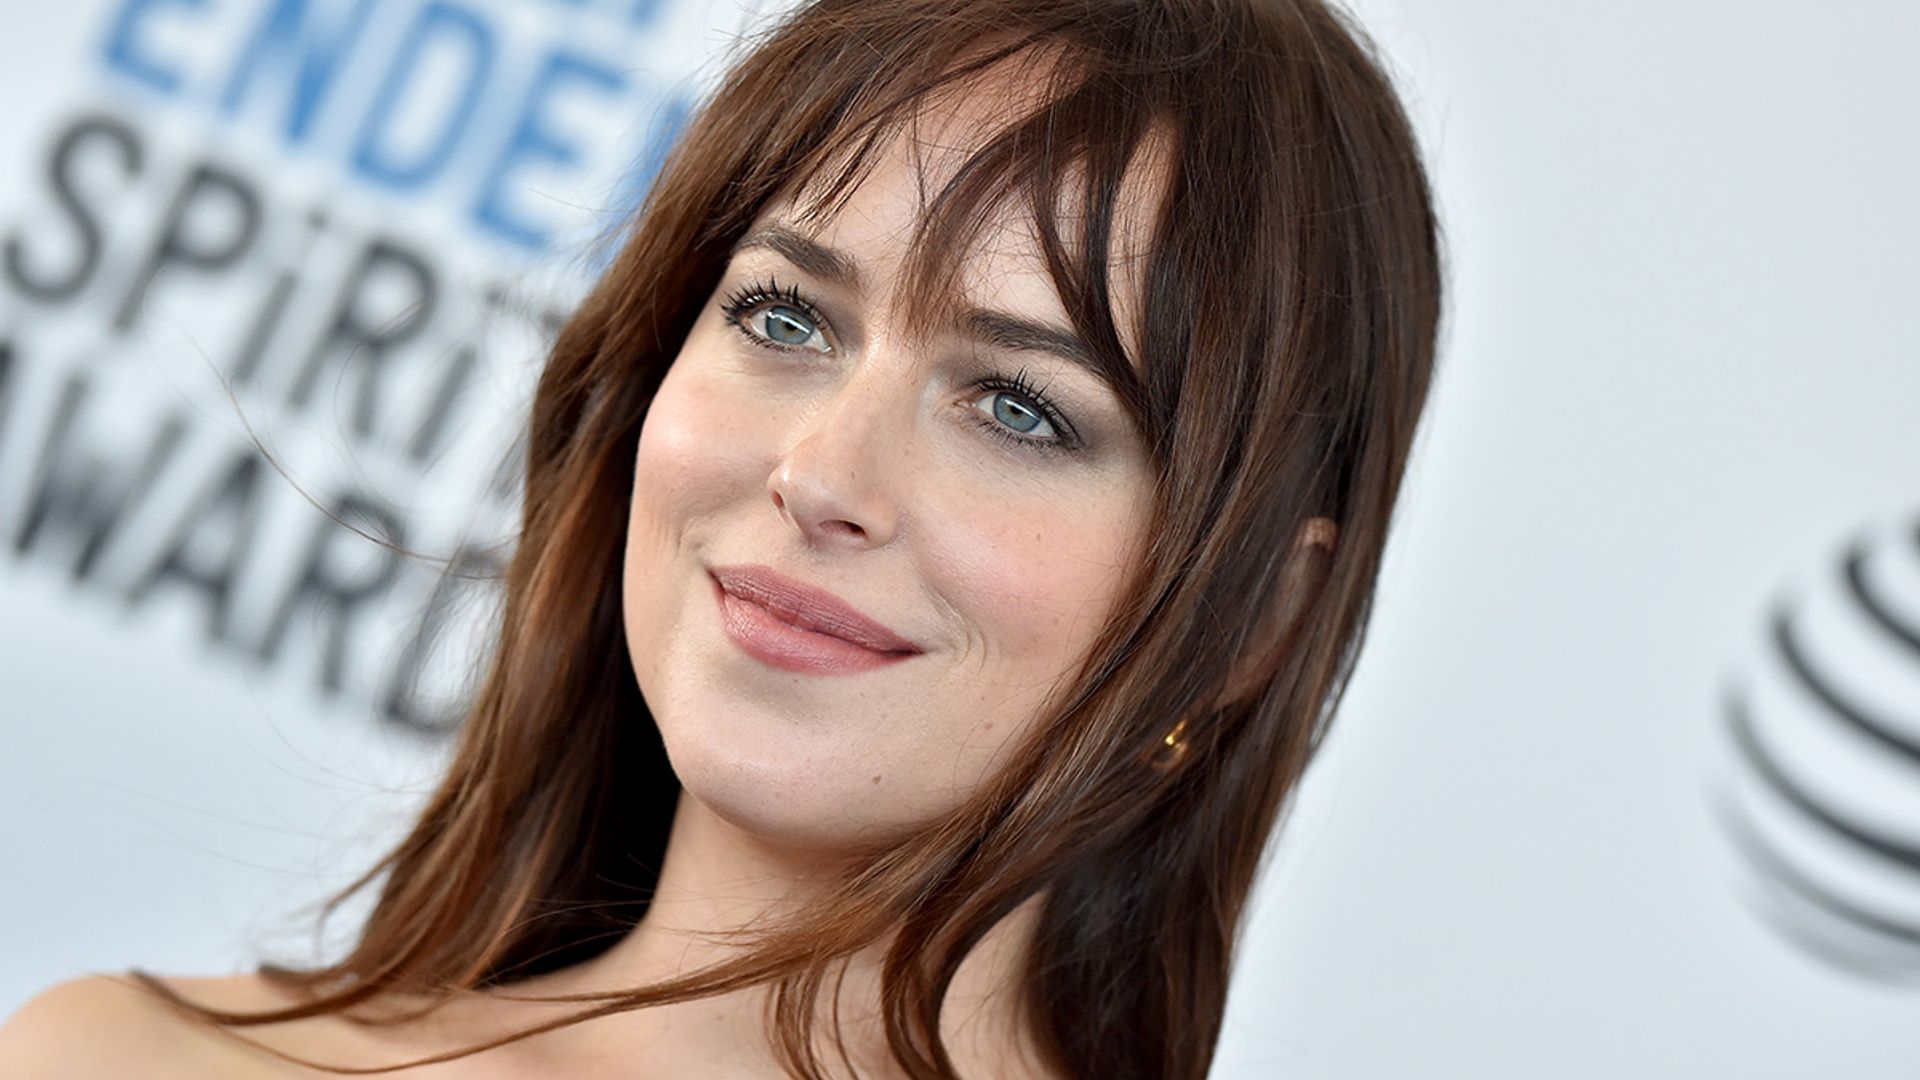 Dakota Johnson set to star in brand new Netflix period drama – but fans are divided